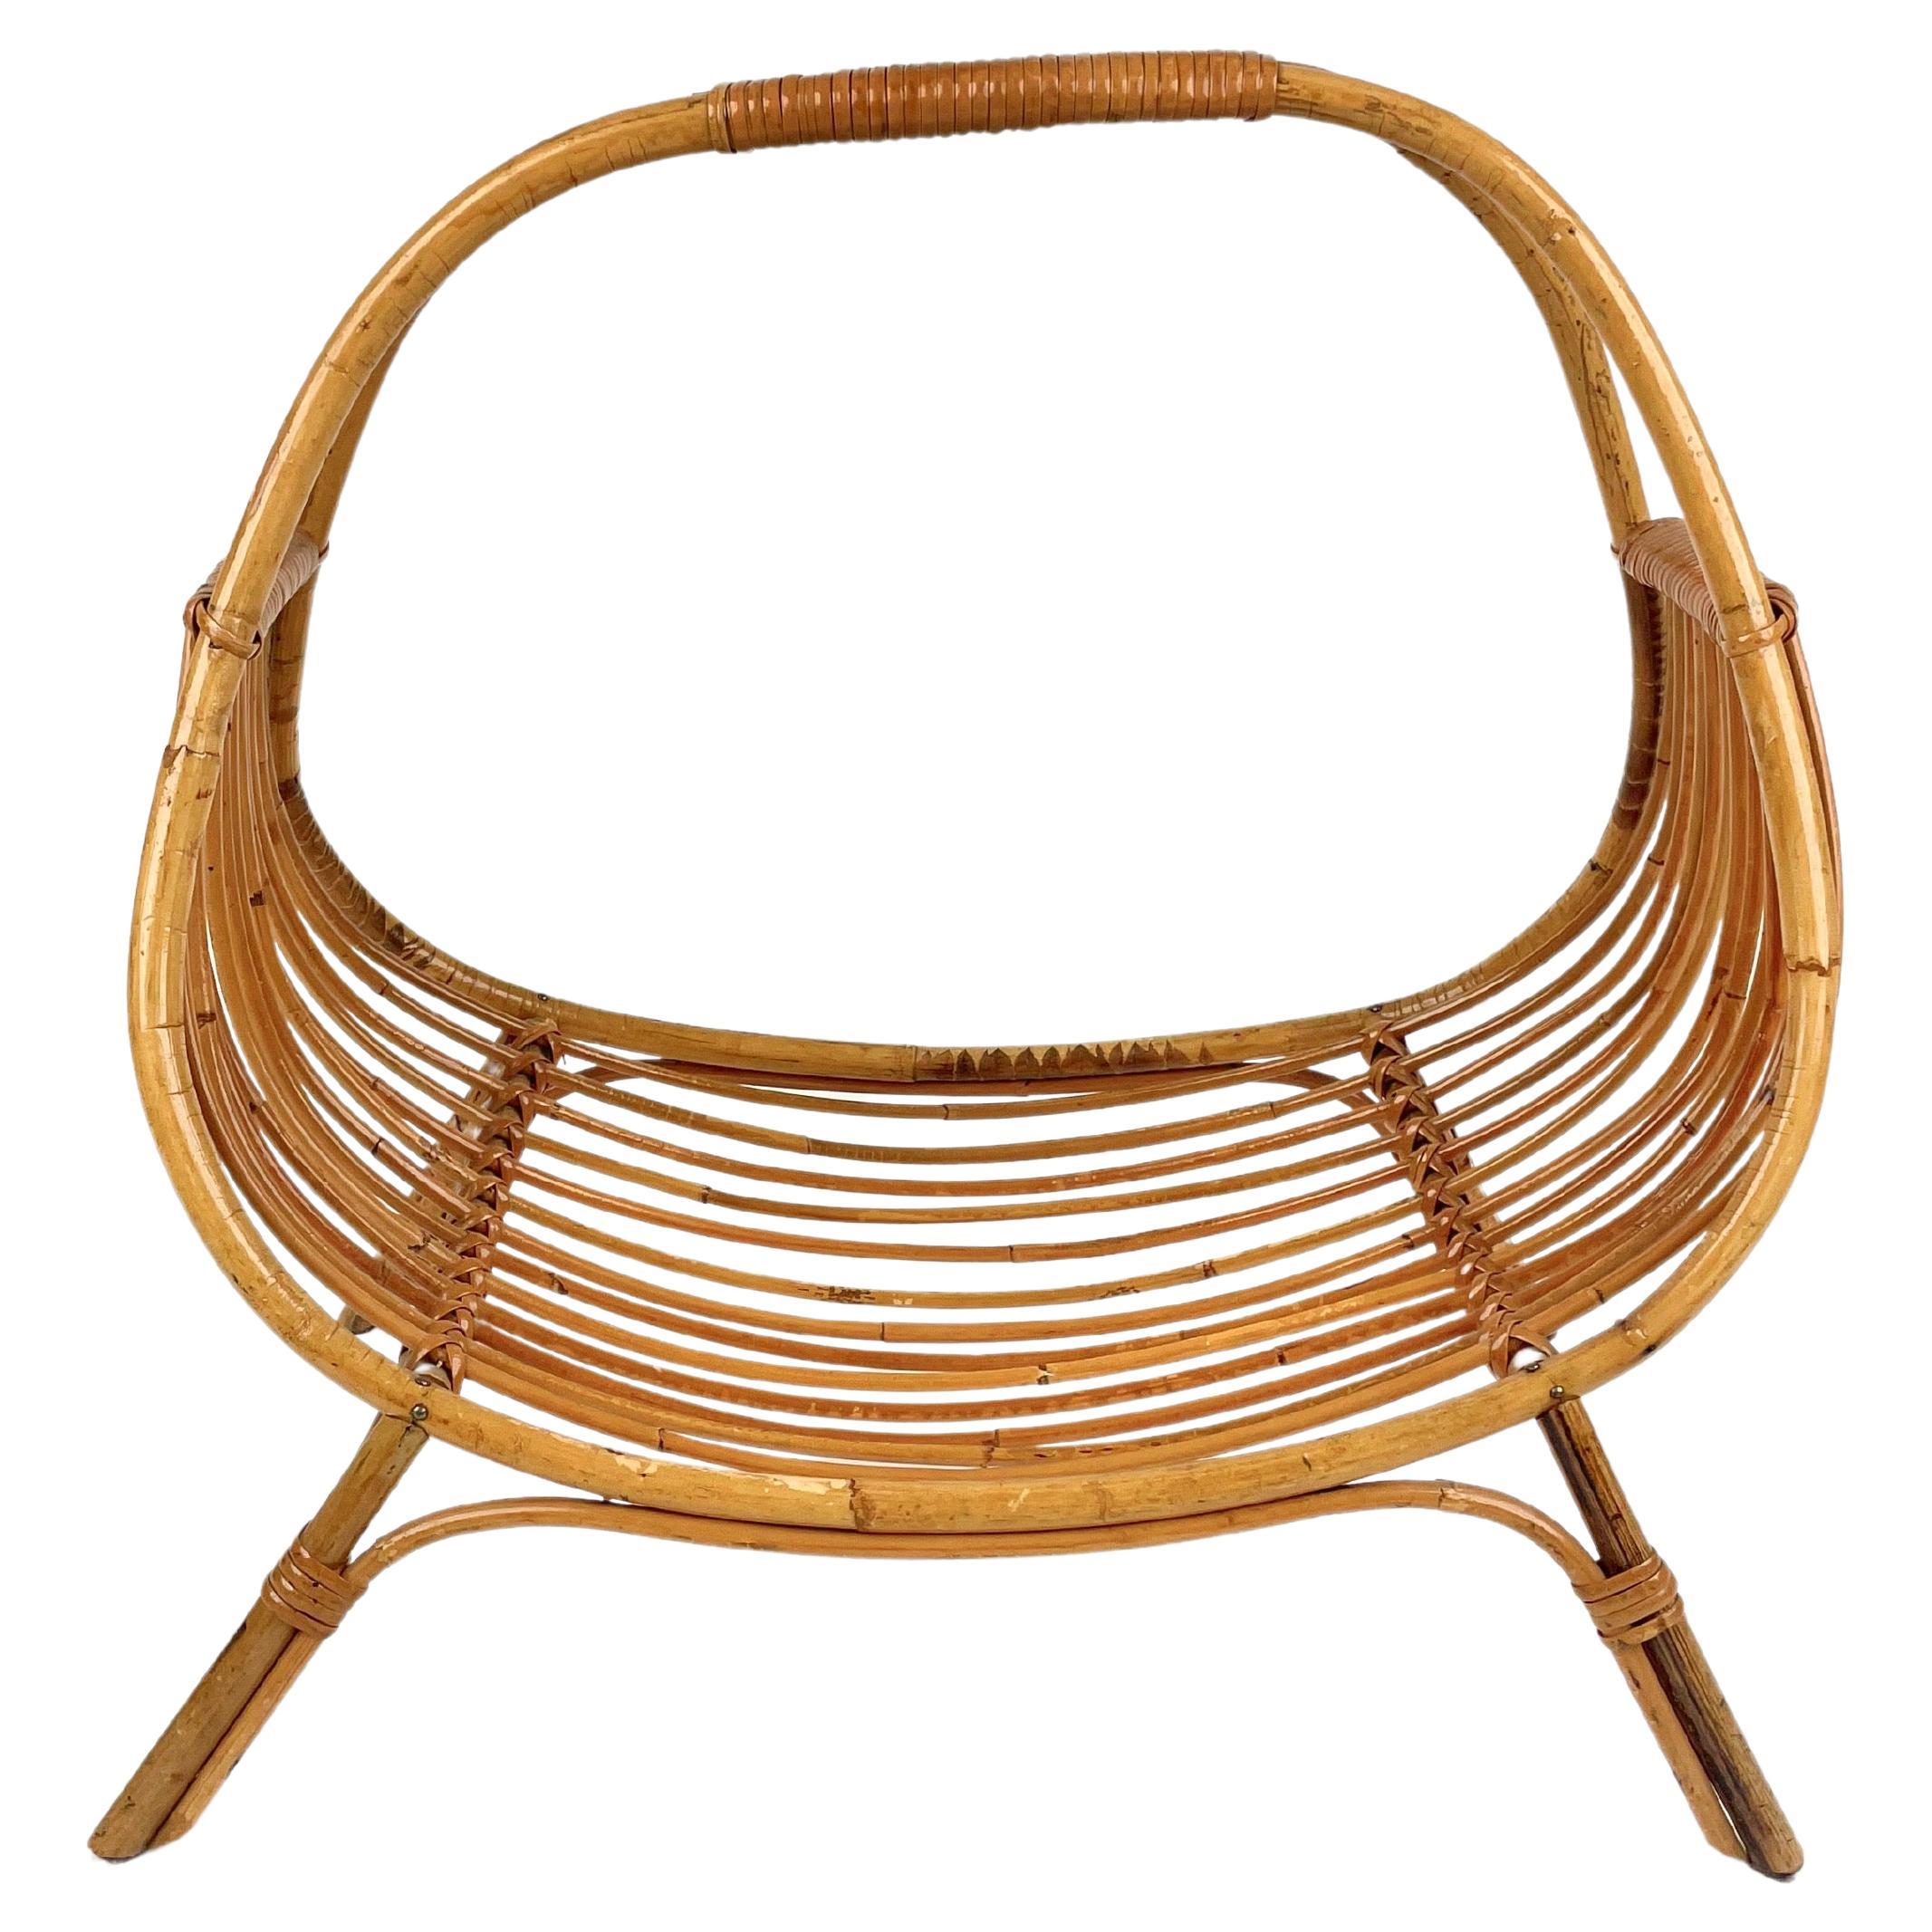 Midcentury Rattan & Bamboo Curved Magazine Rack, Italy 1960s For Sale